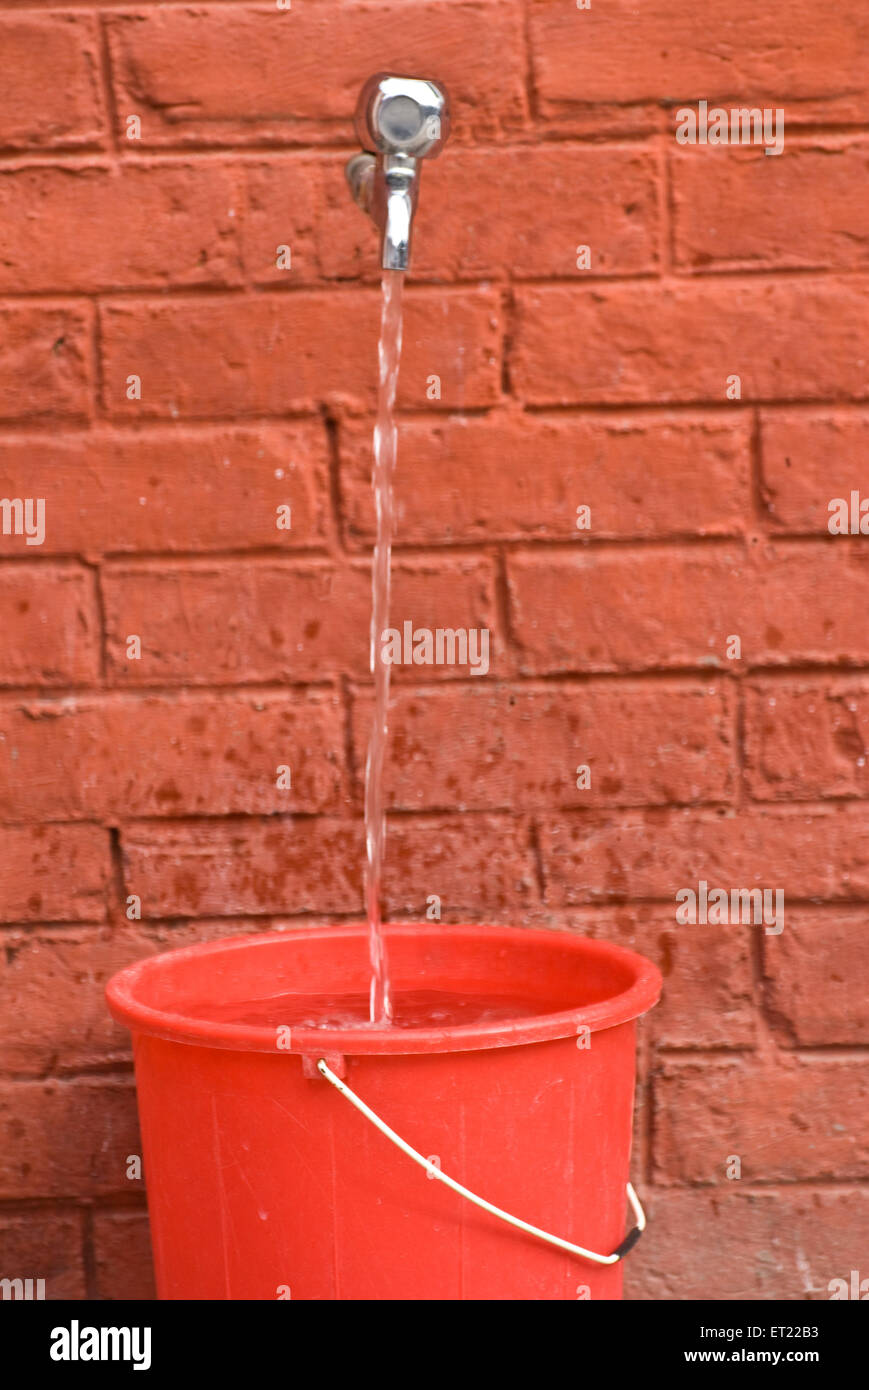 Tap water filling red plastic bucket, India, Asia Stock Photo